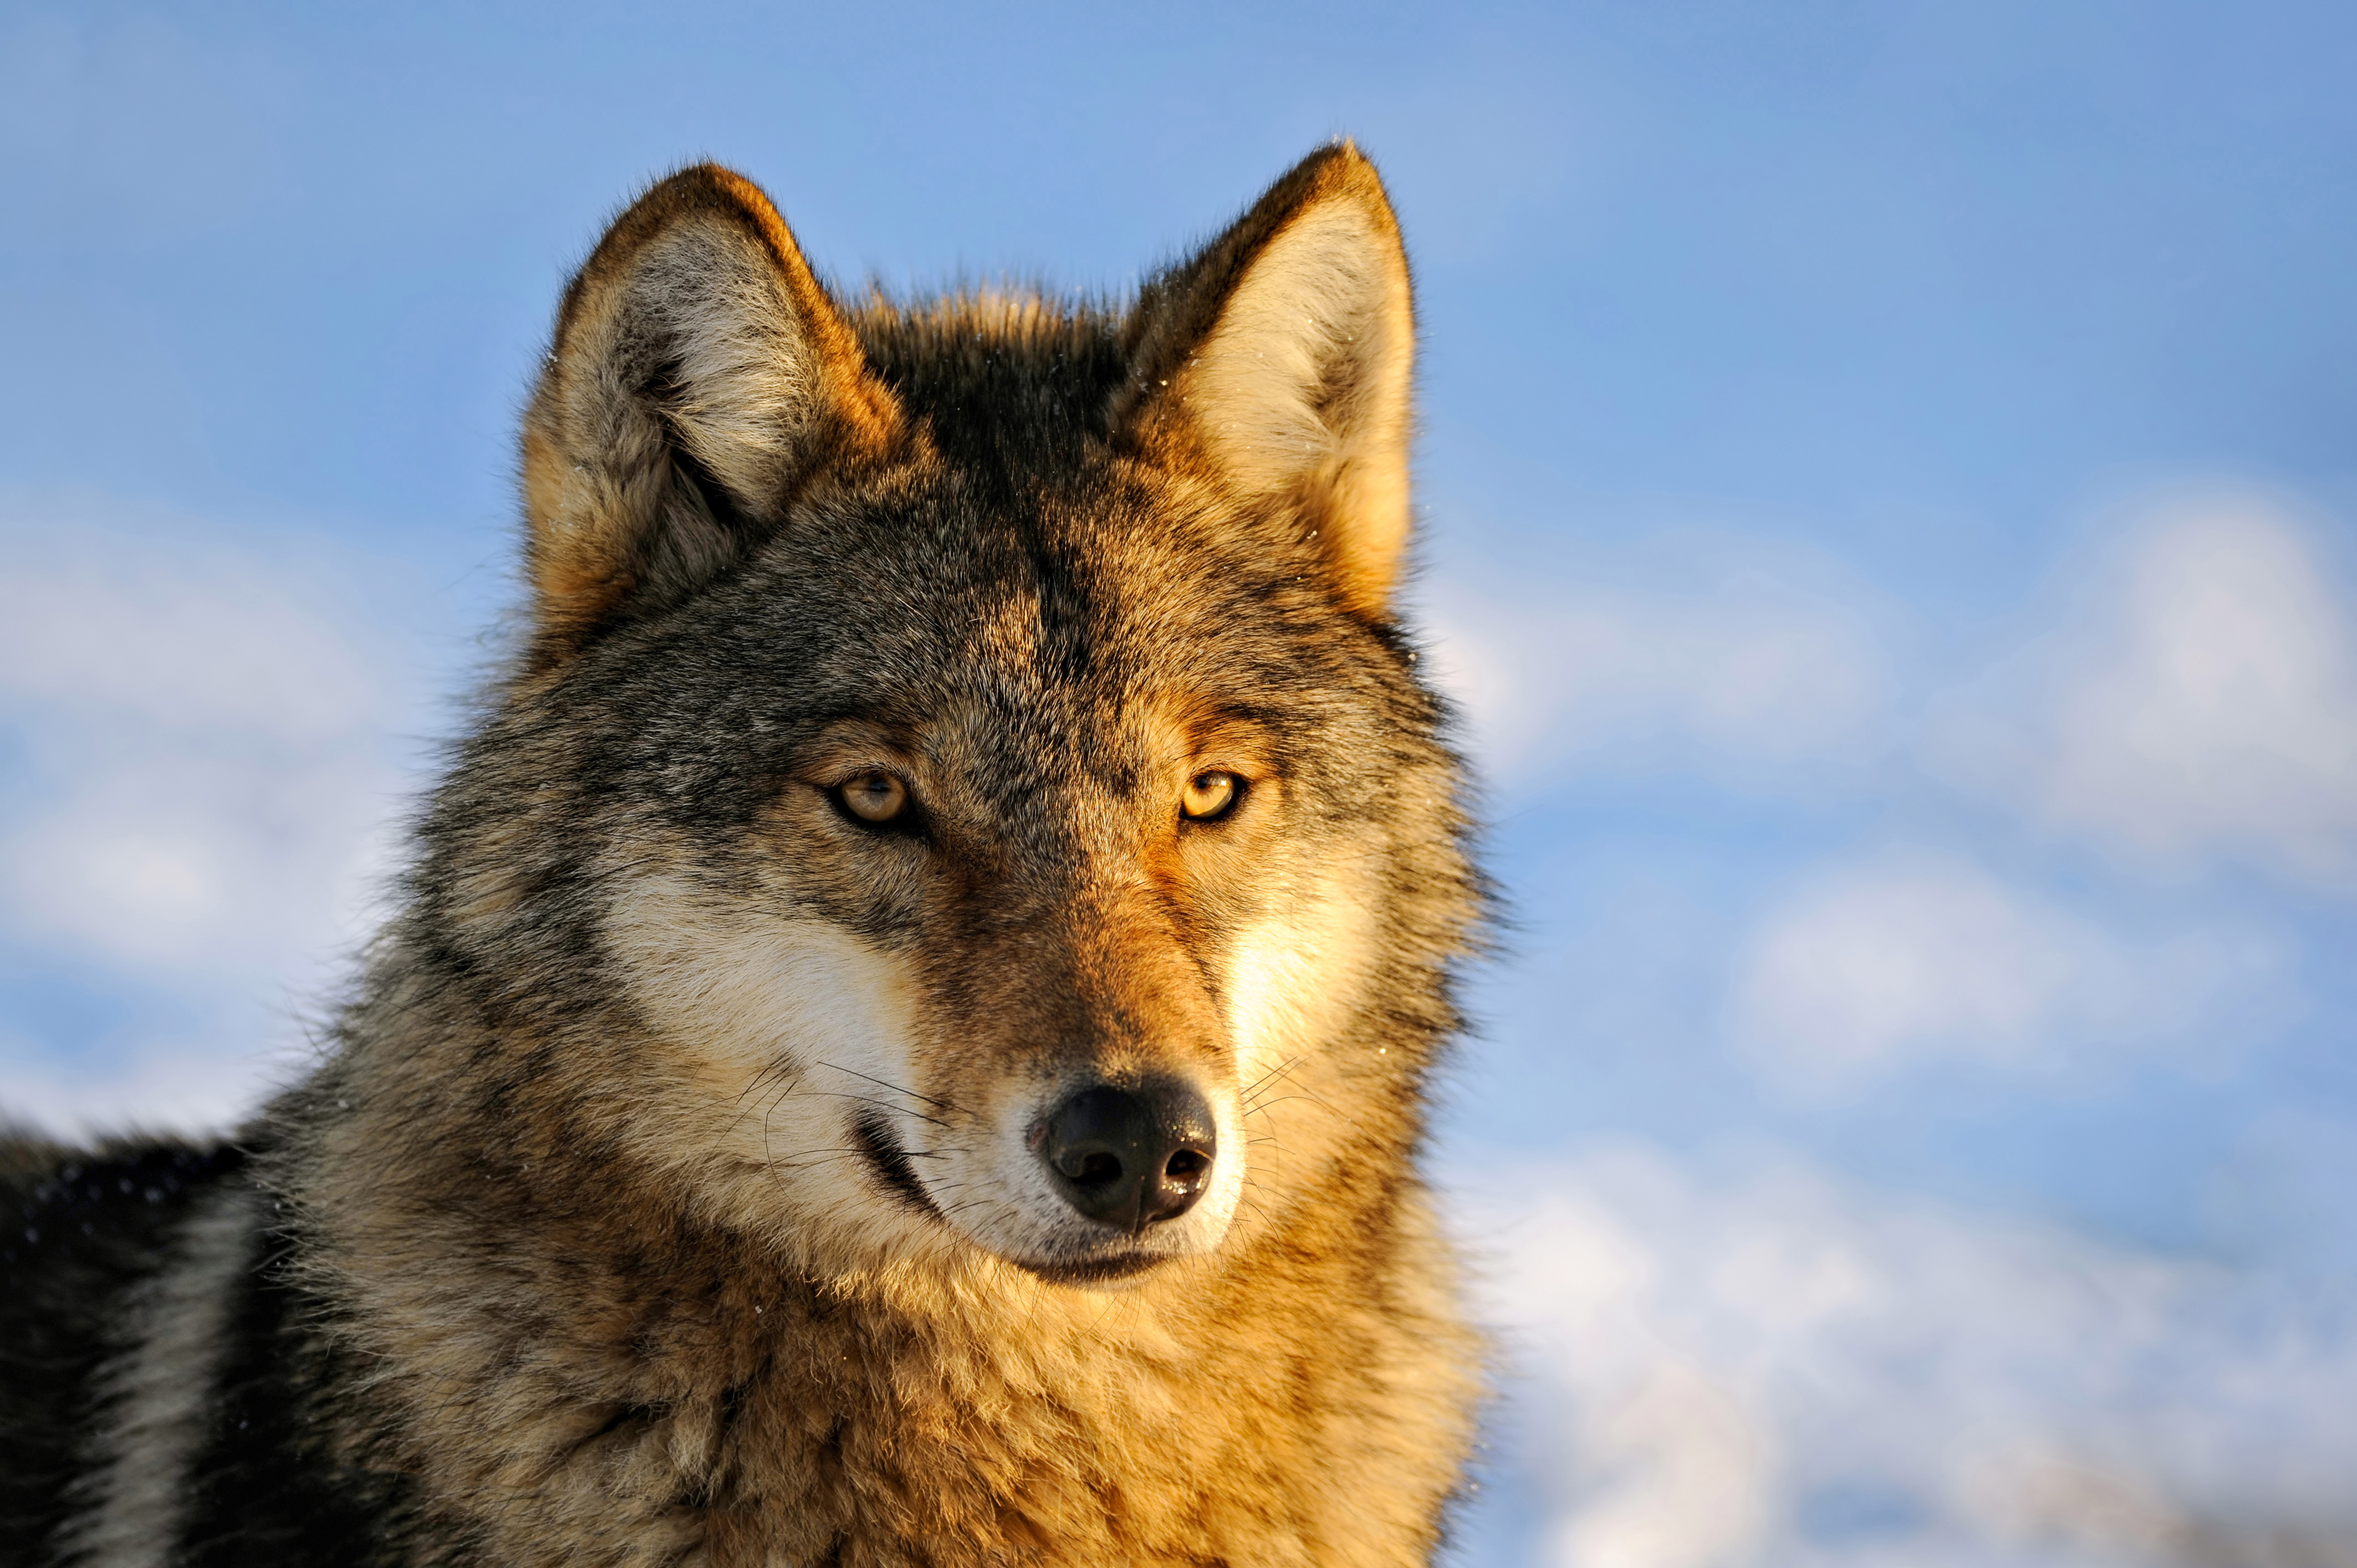 Urgent alert! Act now to prevent trophy hunting of gray wolves · A Humane  World